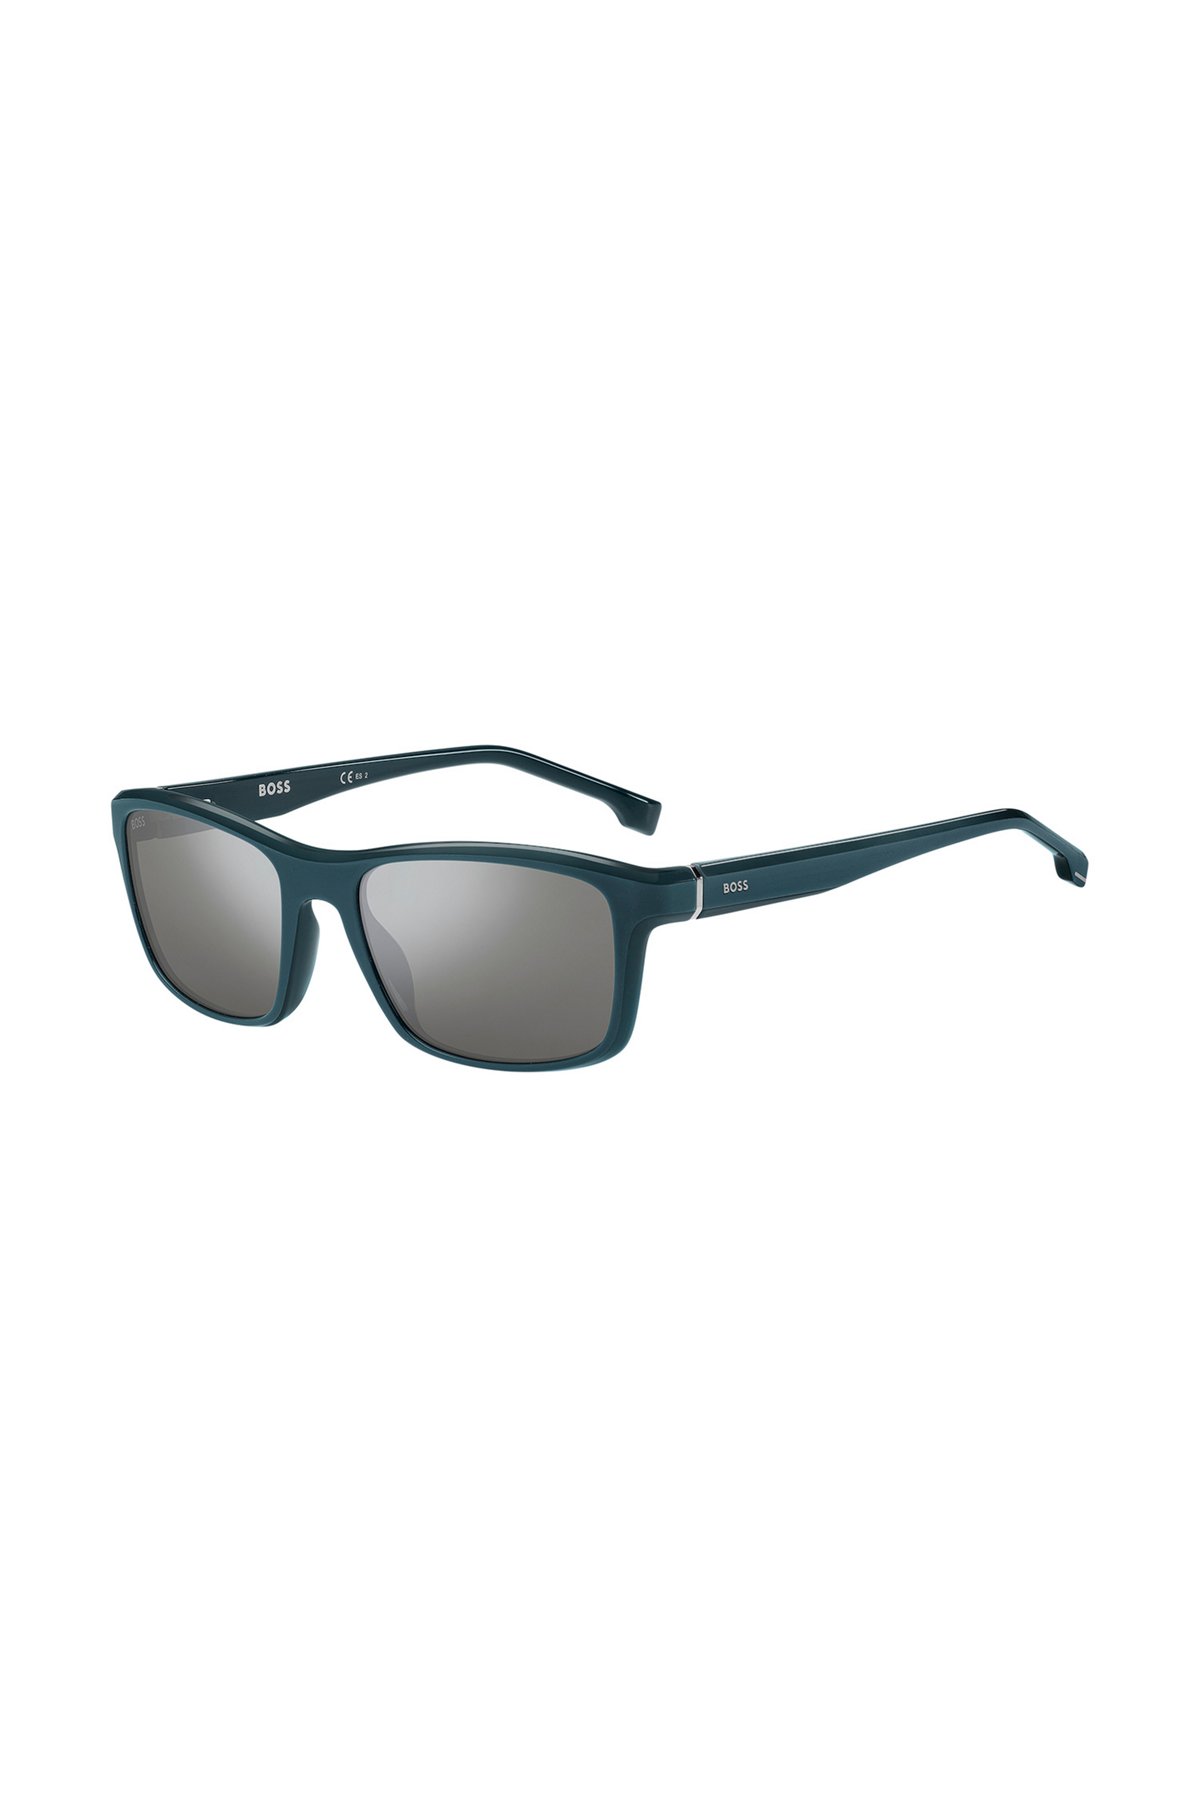 Acetate sunglasses in matte teal with metal trim, Assorted-Pre-Pack